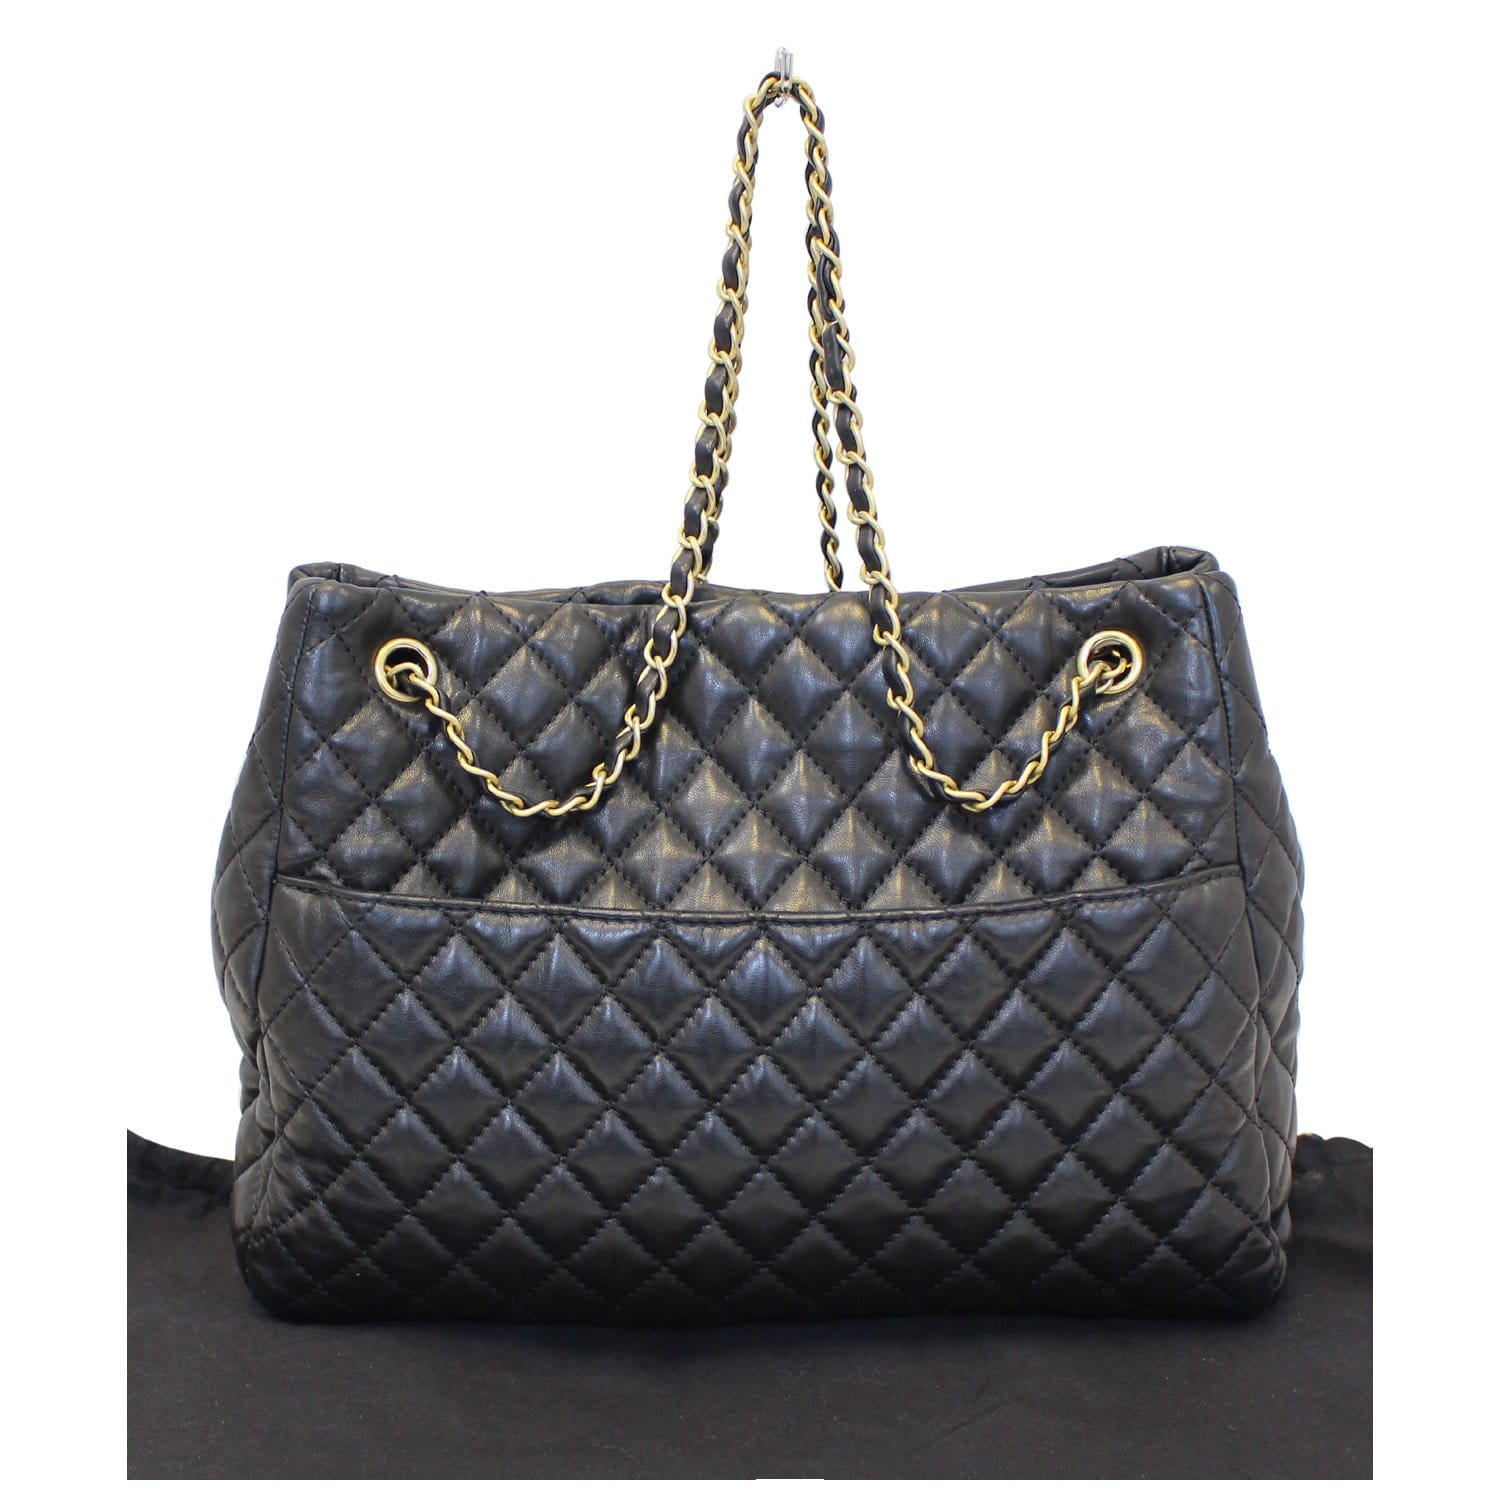 Chanel Puffy Bubbly CC Flap Bag Quilted Calfskin Medium Black 9272019